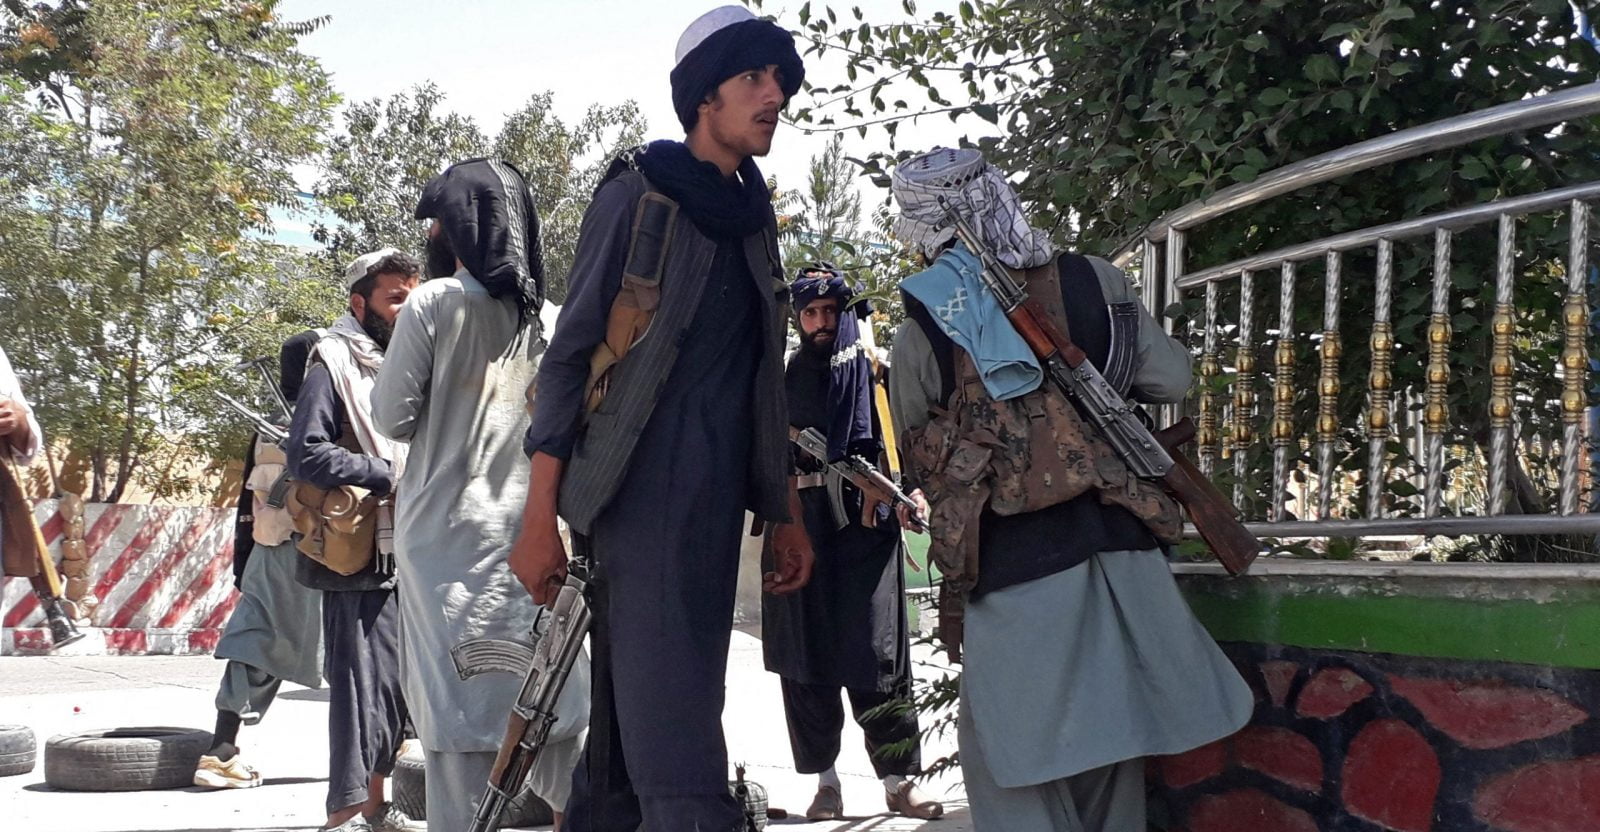 Taliban fighters armed with guns stand along the roadside in Ghazni